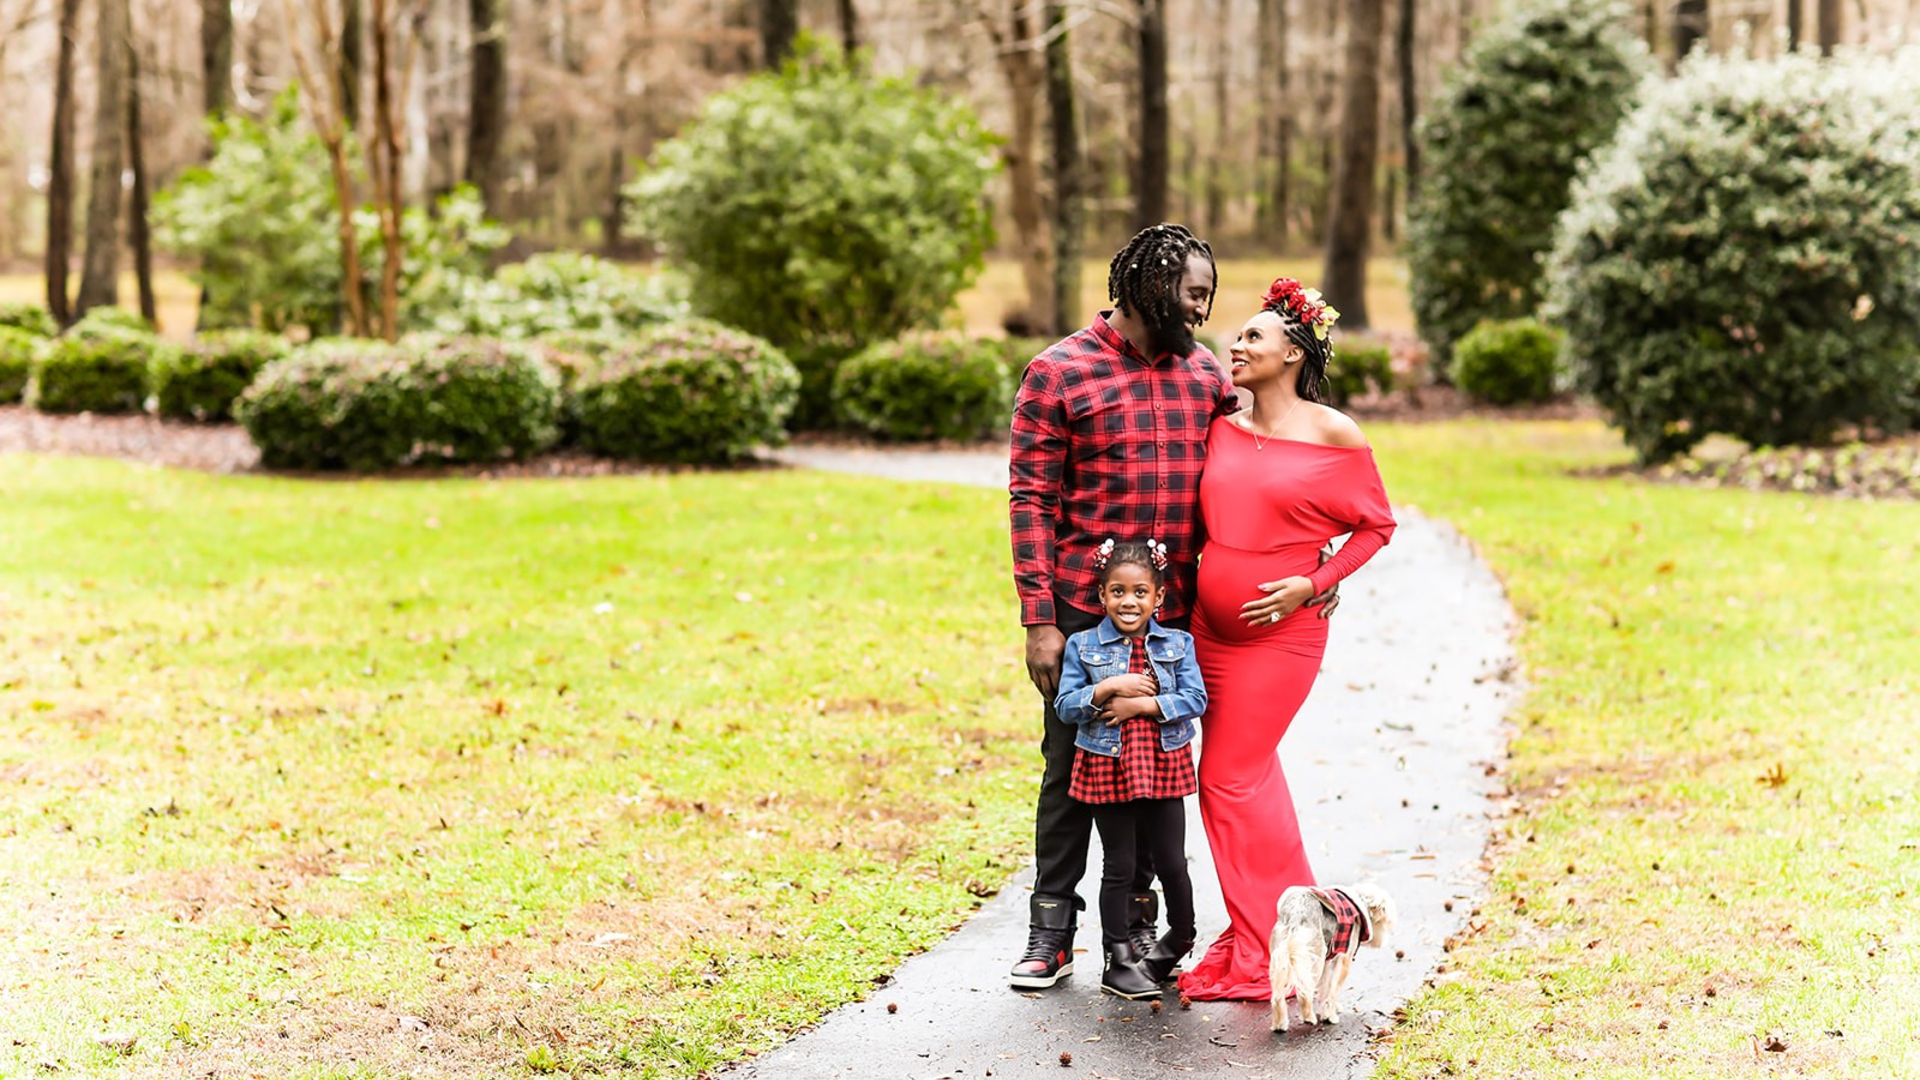 Kiki Searcy is an athlete who’s also married to a professional football player, so she’s no stranger to hard work and physical challenges. But when Kiki was pregnant with her son, she faced a tremendous number of obstacles. Luckily, she came through it like a champ and she and her husband now have two healthy children, Kenna and Dominick. 